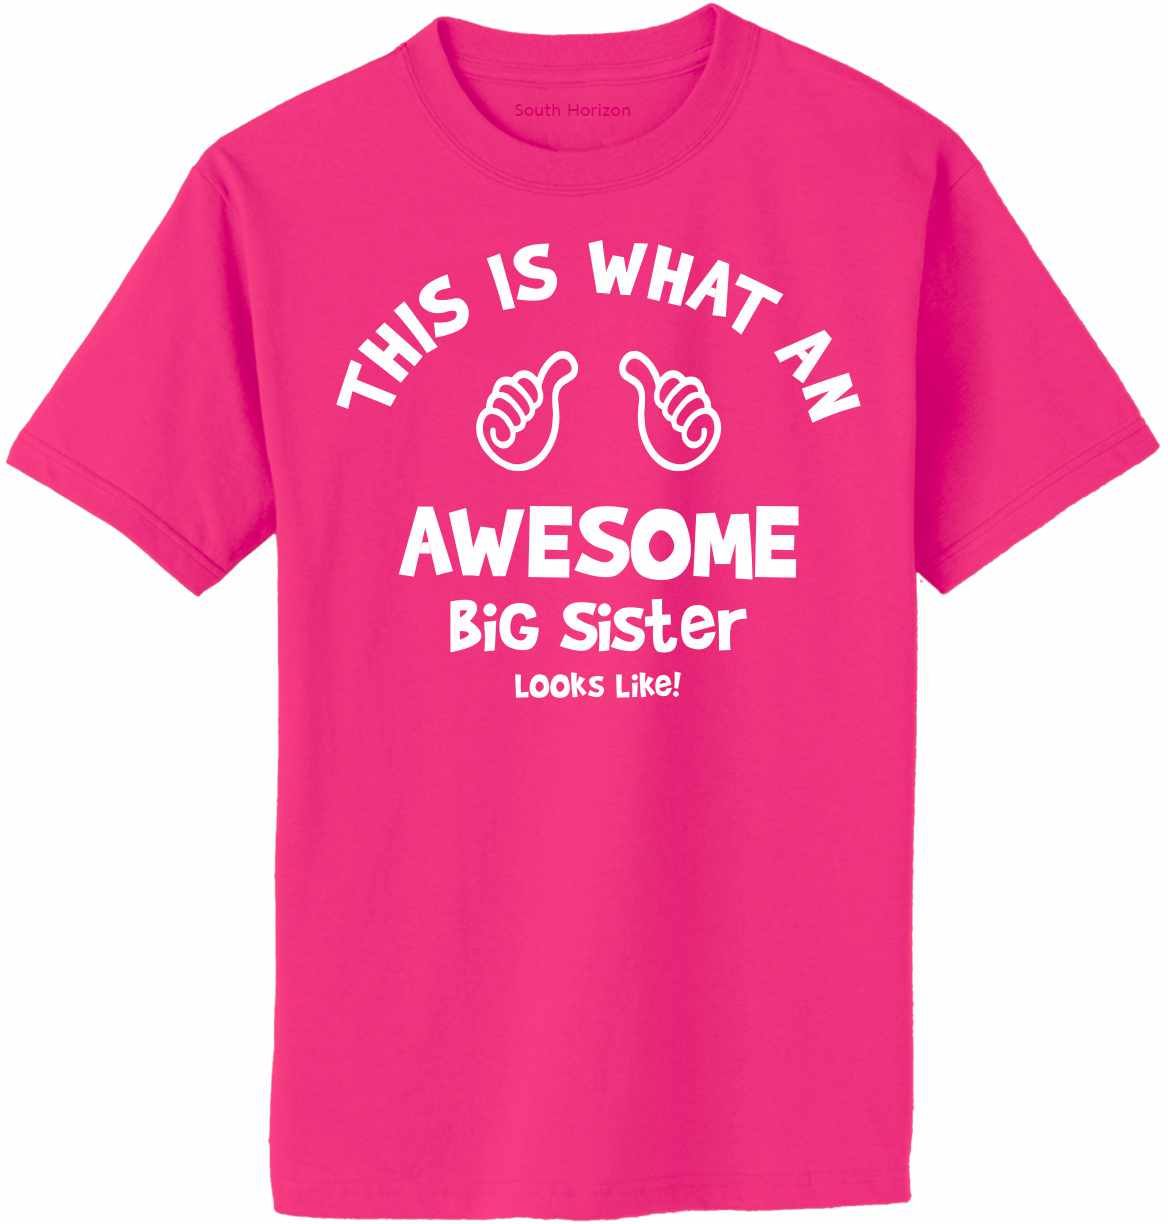 This is What an AWESOME BIG SISTER Looks Like Adult T-Shirt